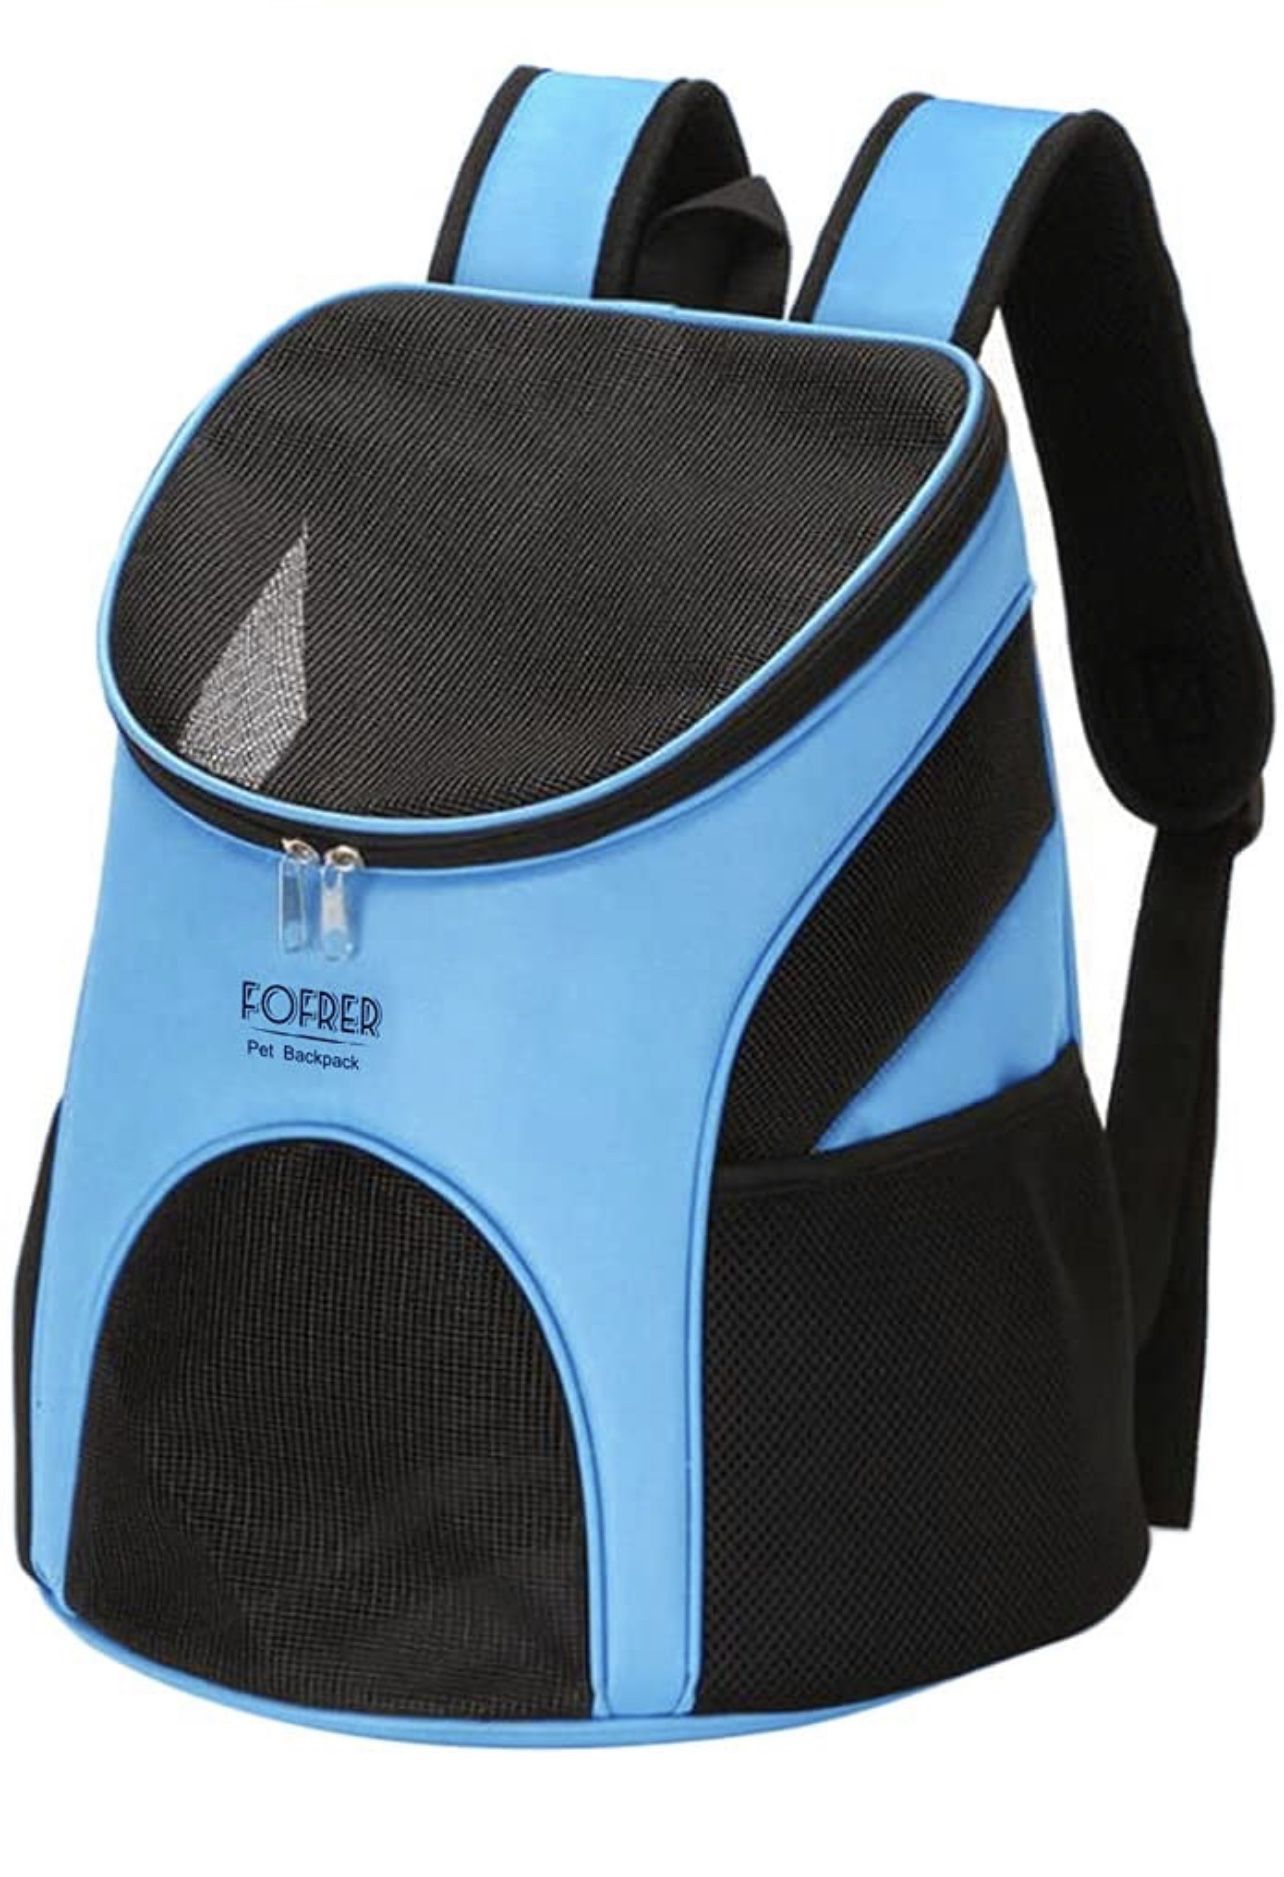 Dog Carrier Backpacks for Small Dogs